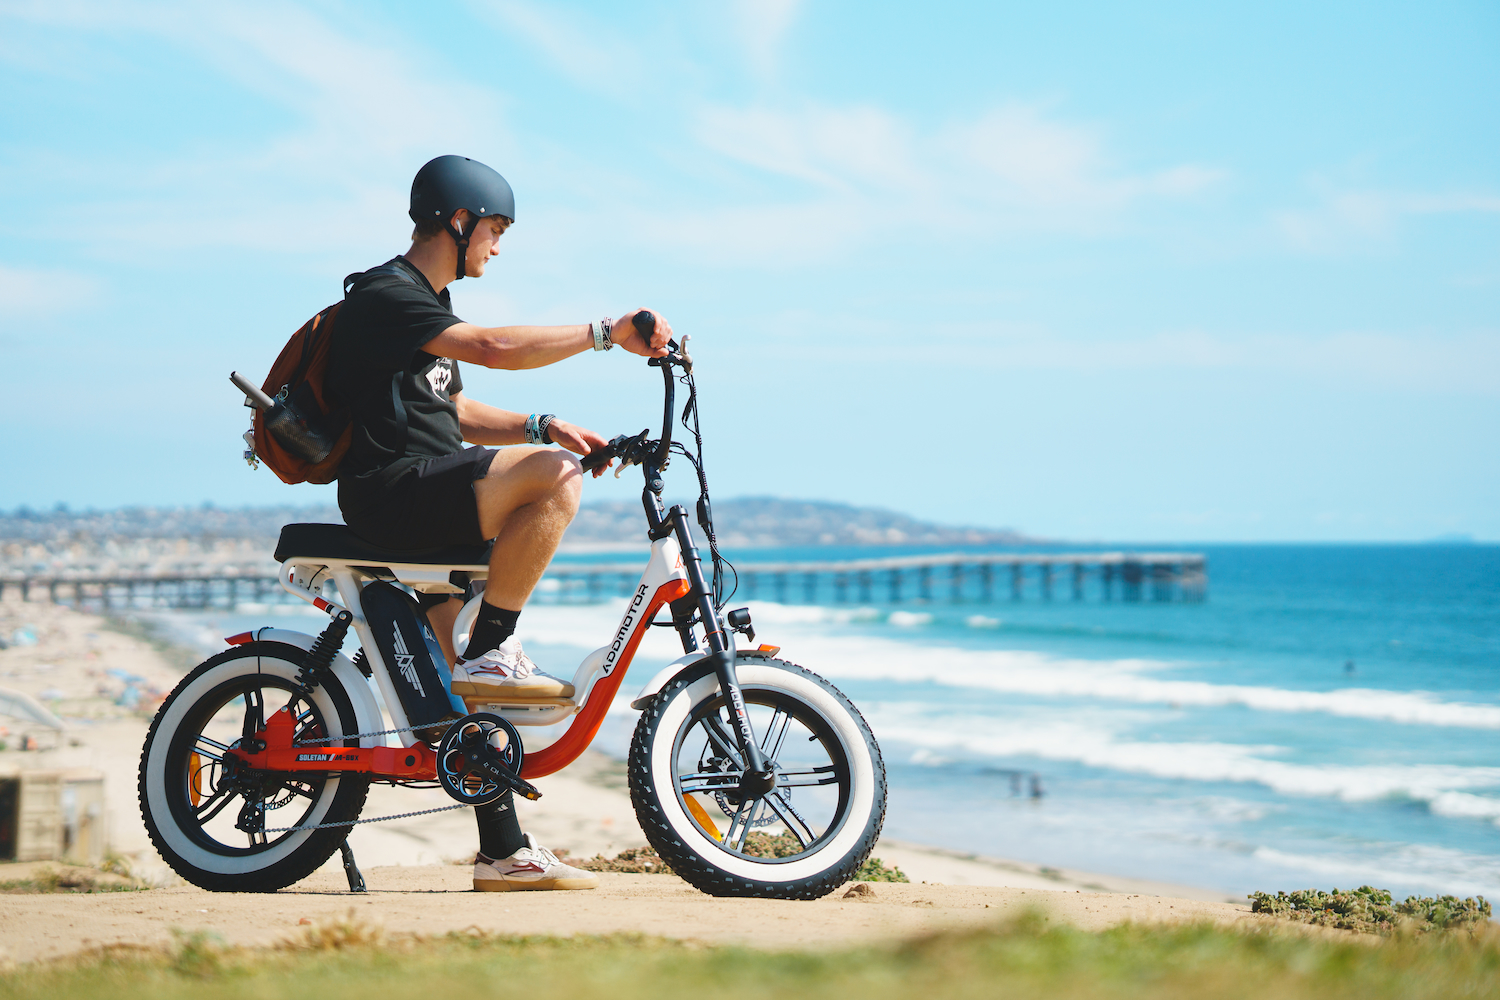 As a free skater to review on an electric cruiser bike